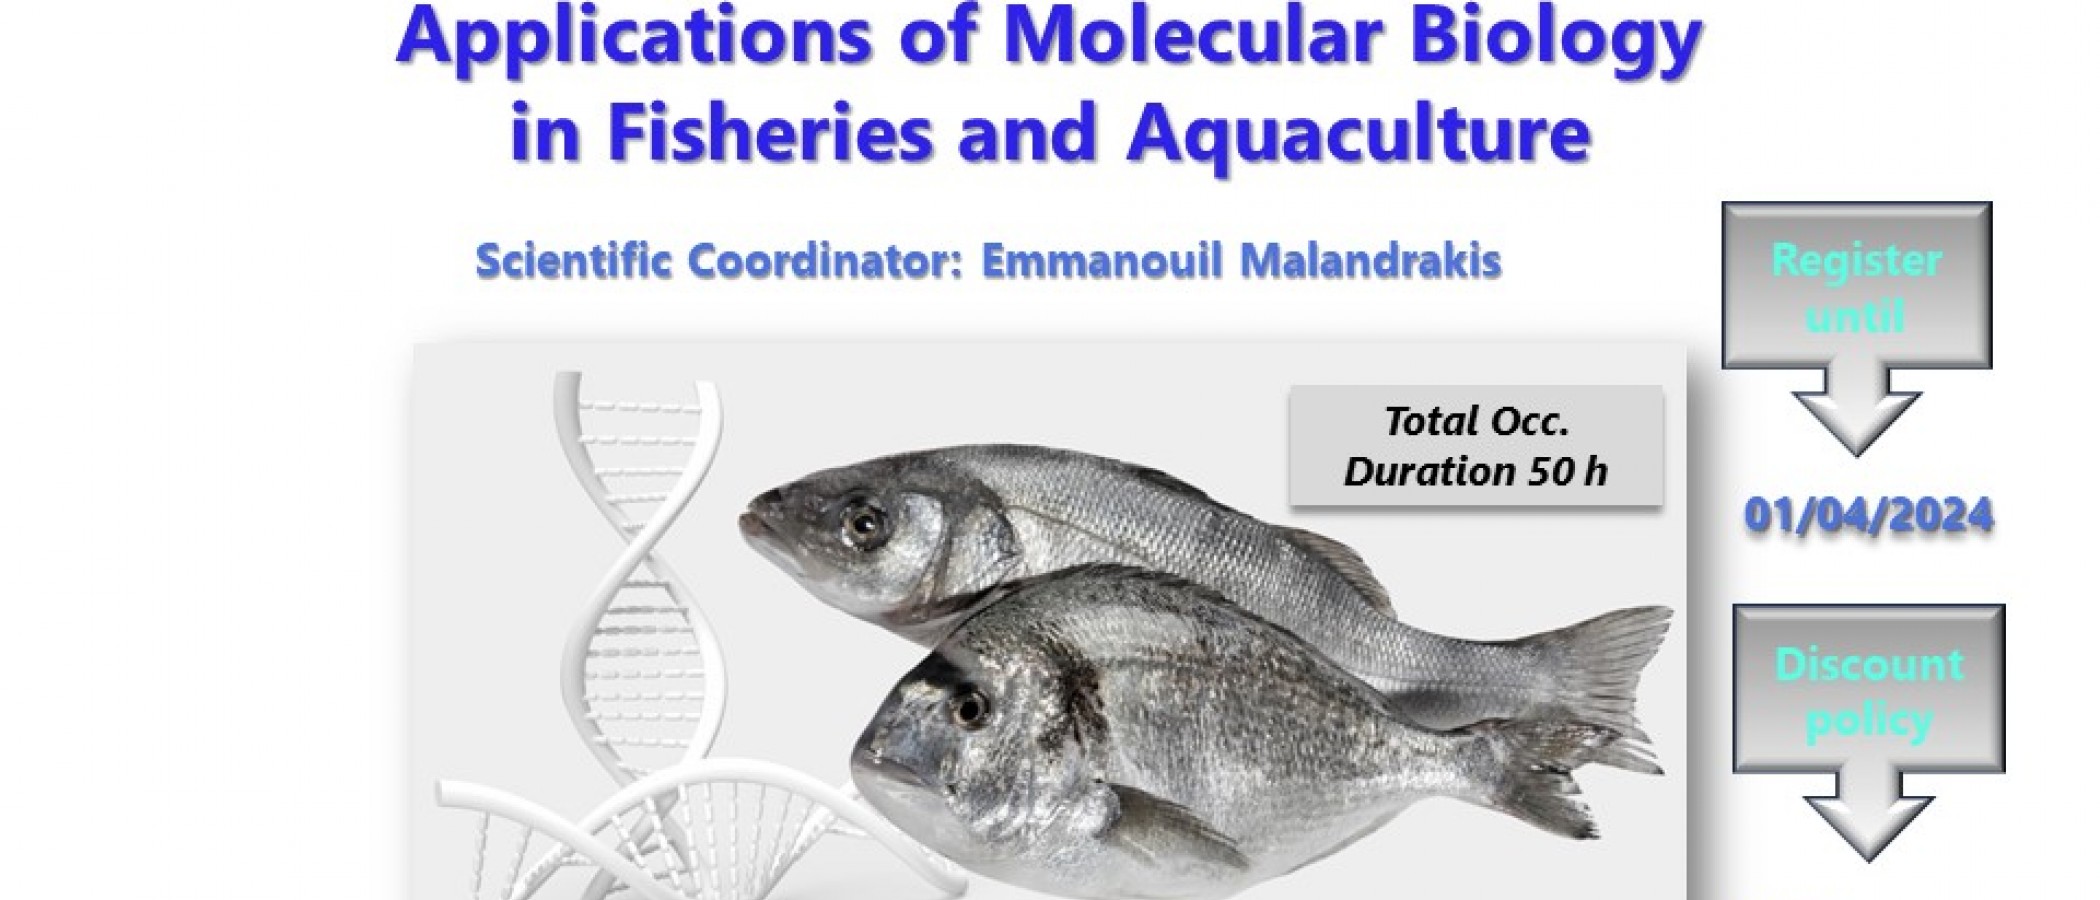 Applications of Molecular Biology in Fisheries and Aquaculture